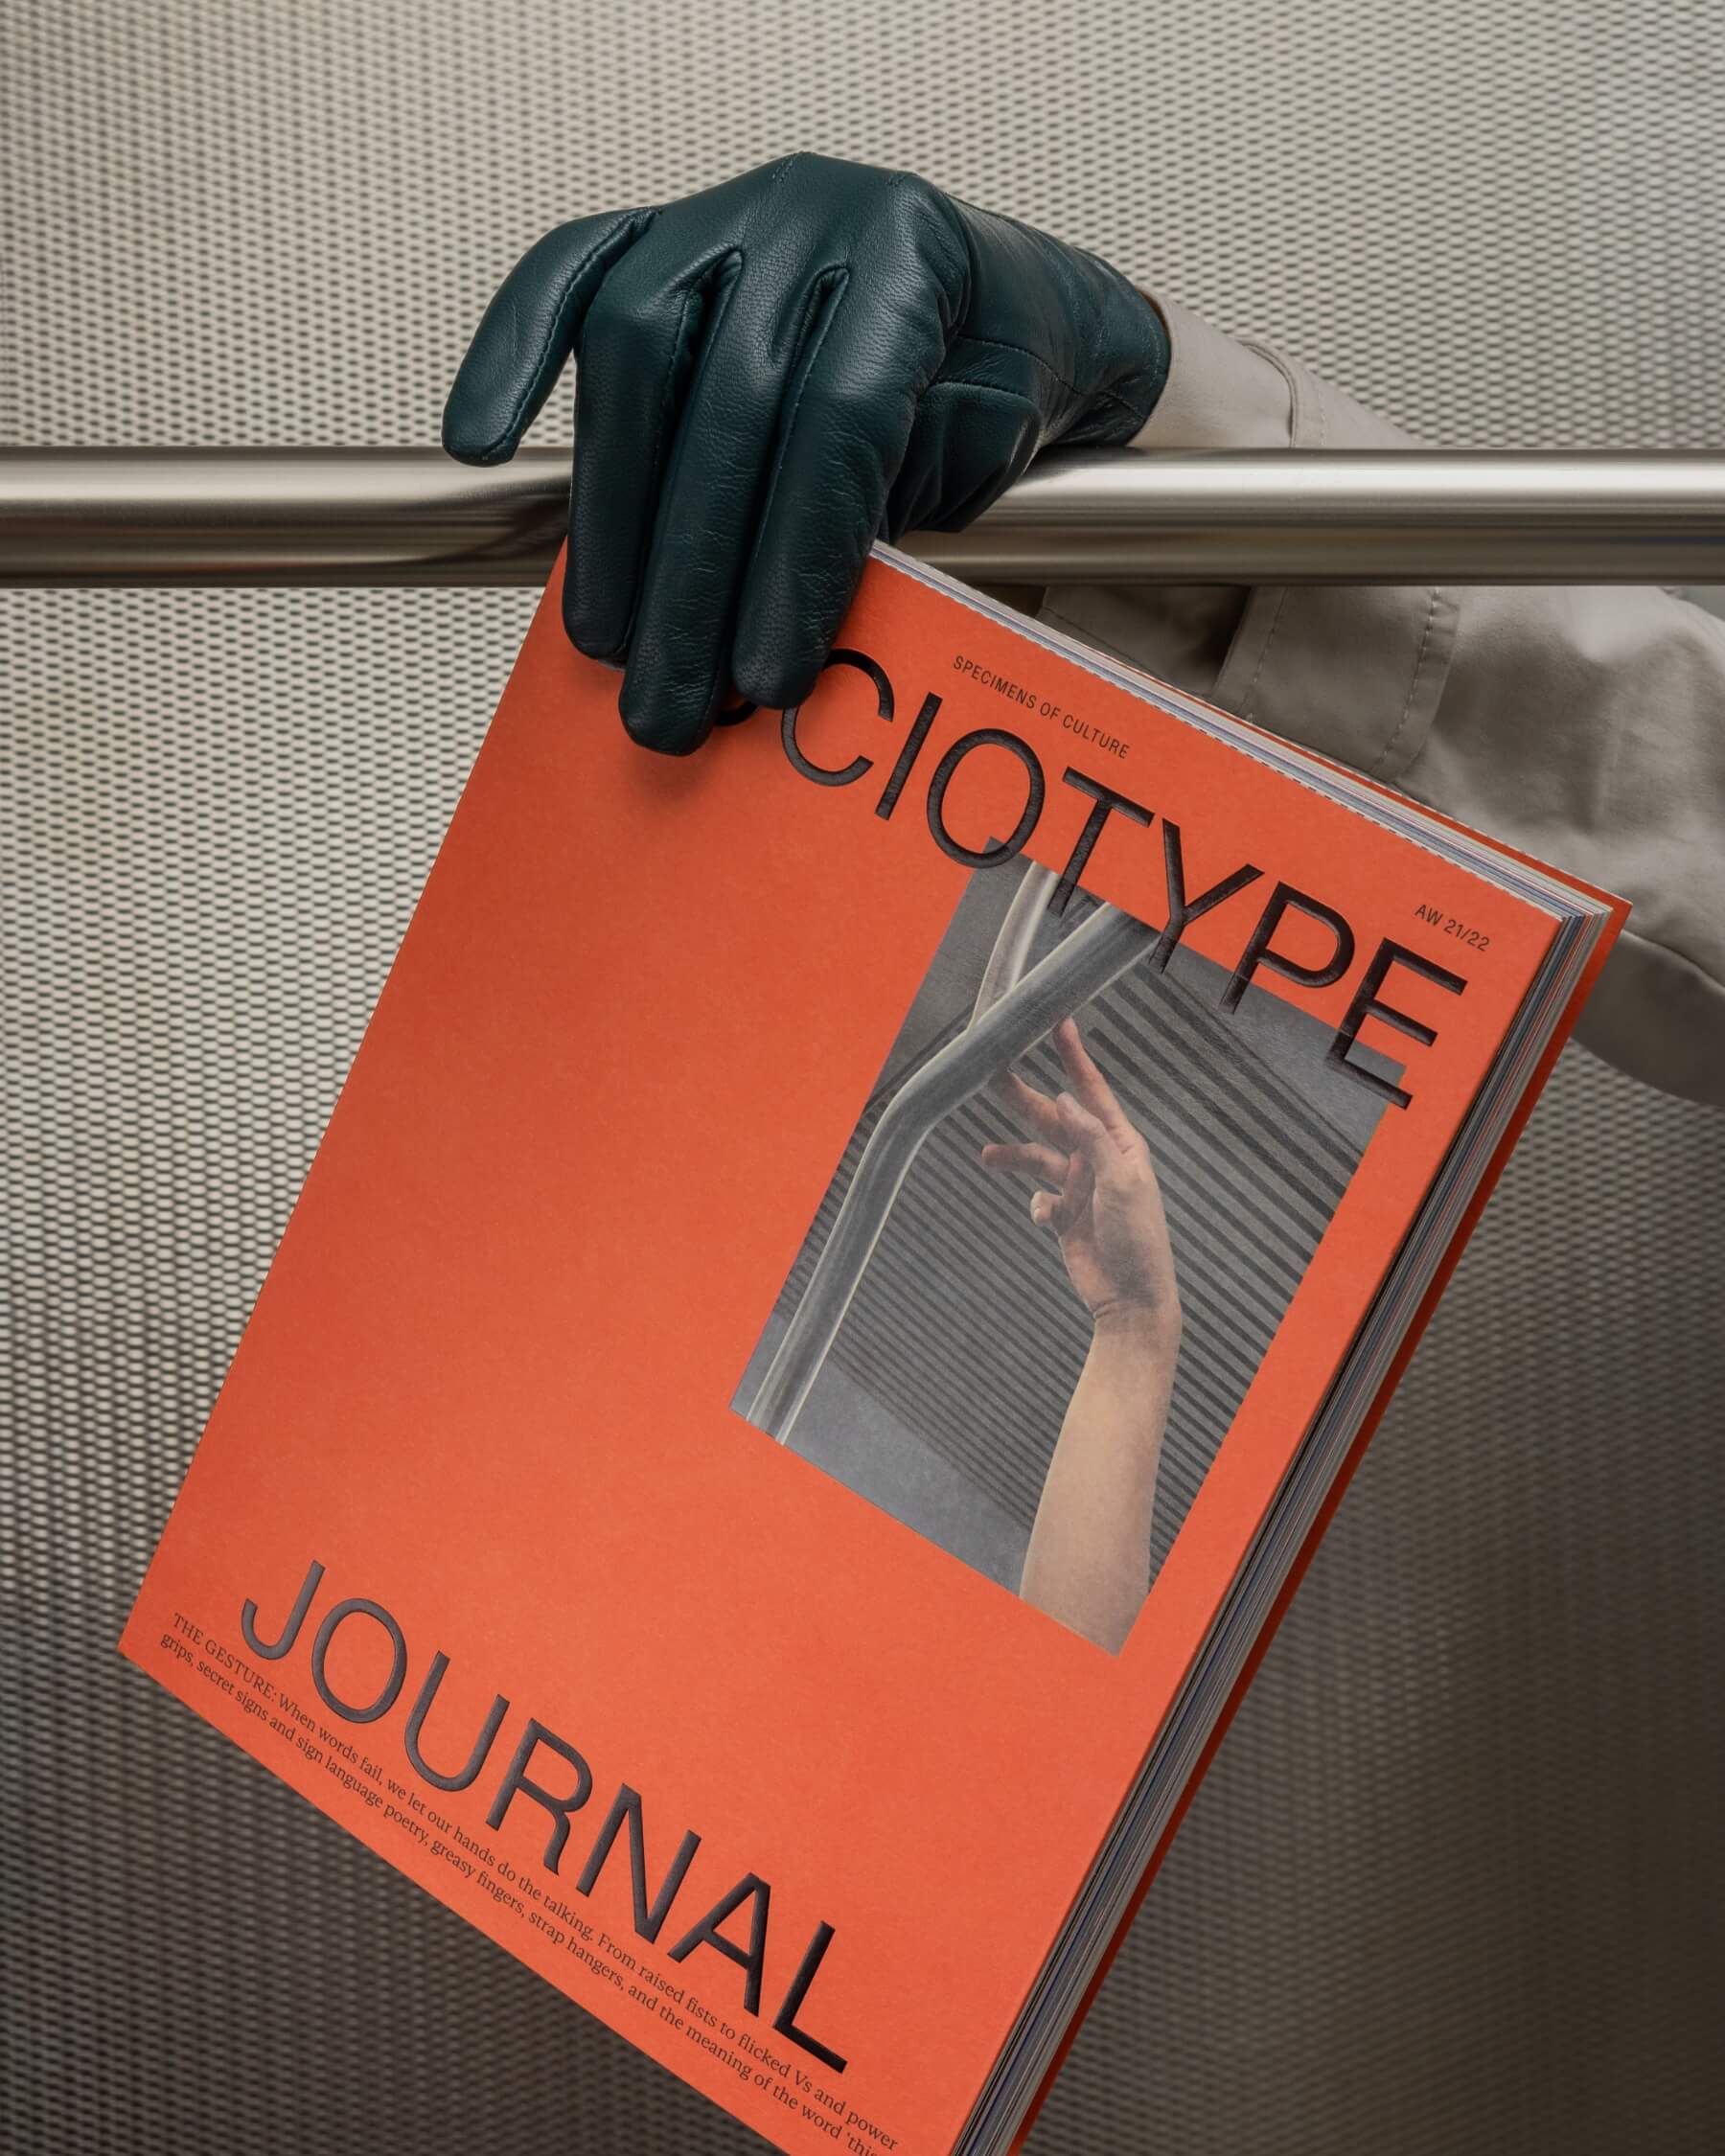 Sociotype Journal Issue #1: The Gesture